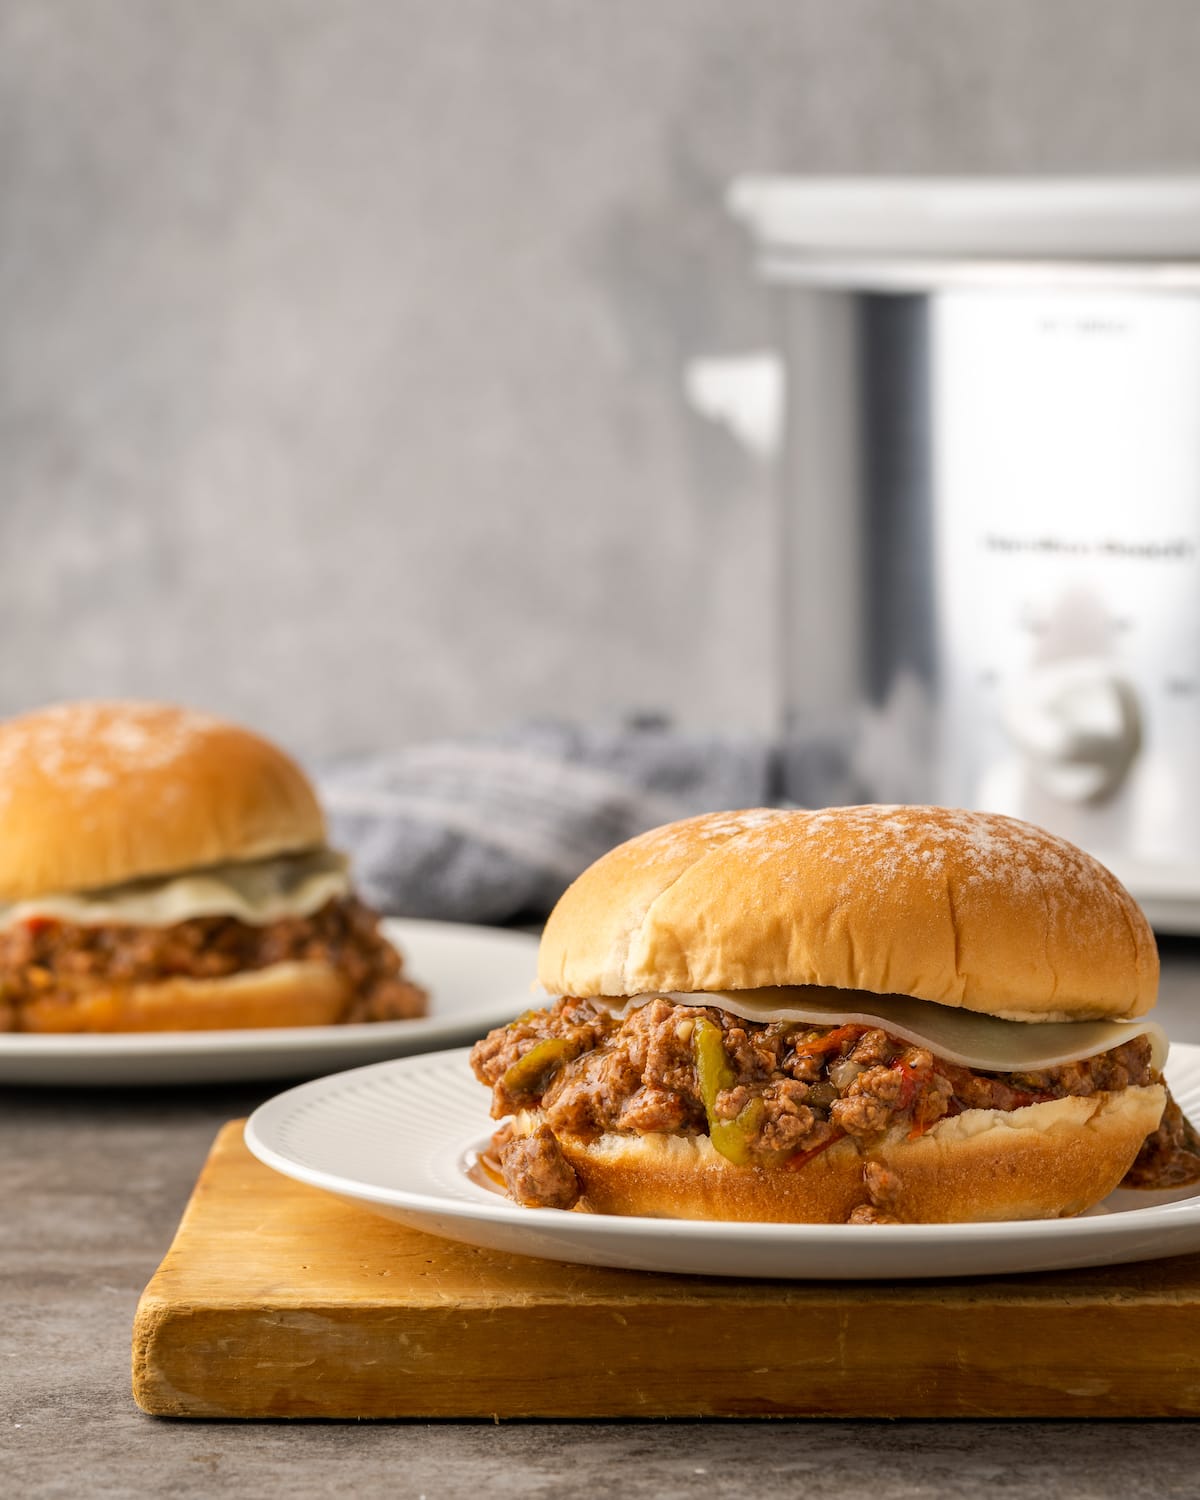 Crock Pot Philly Cheesesteak Sloppy Joes in a bun on a plate.